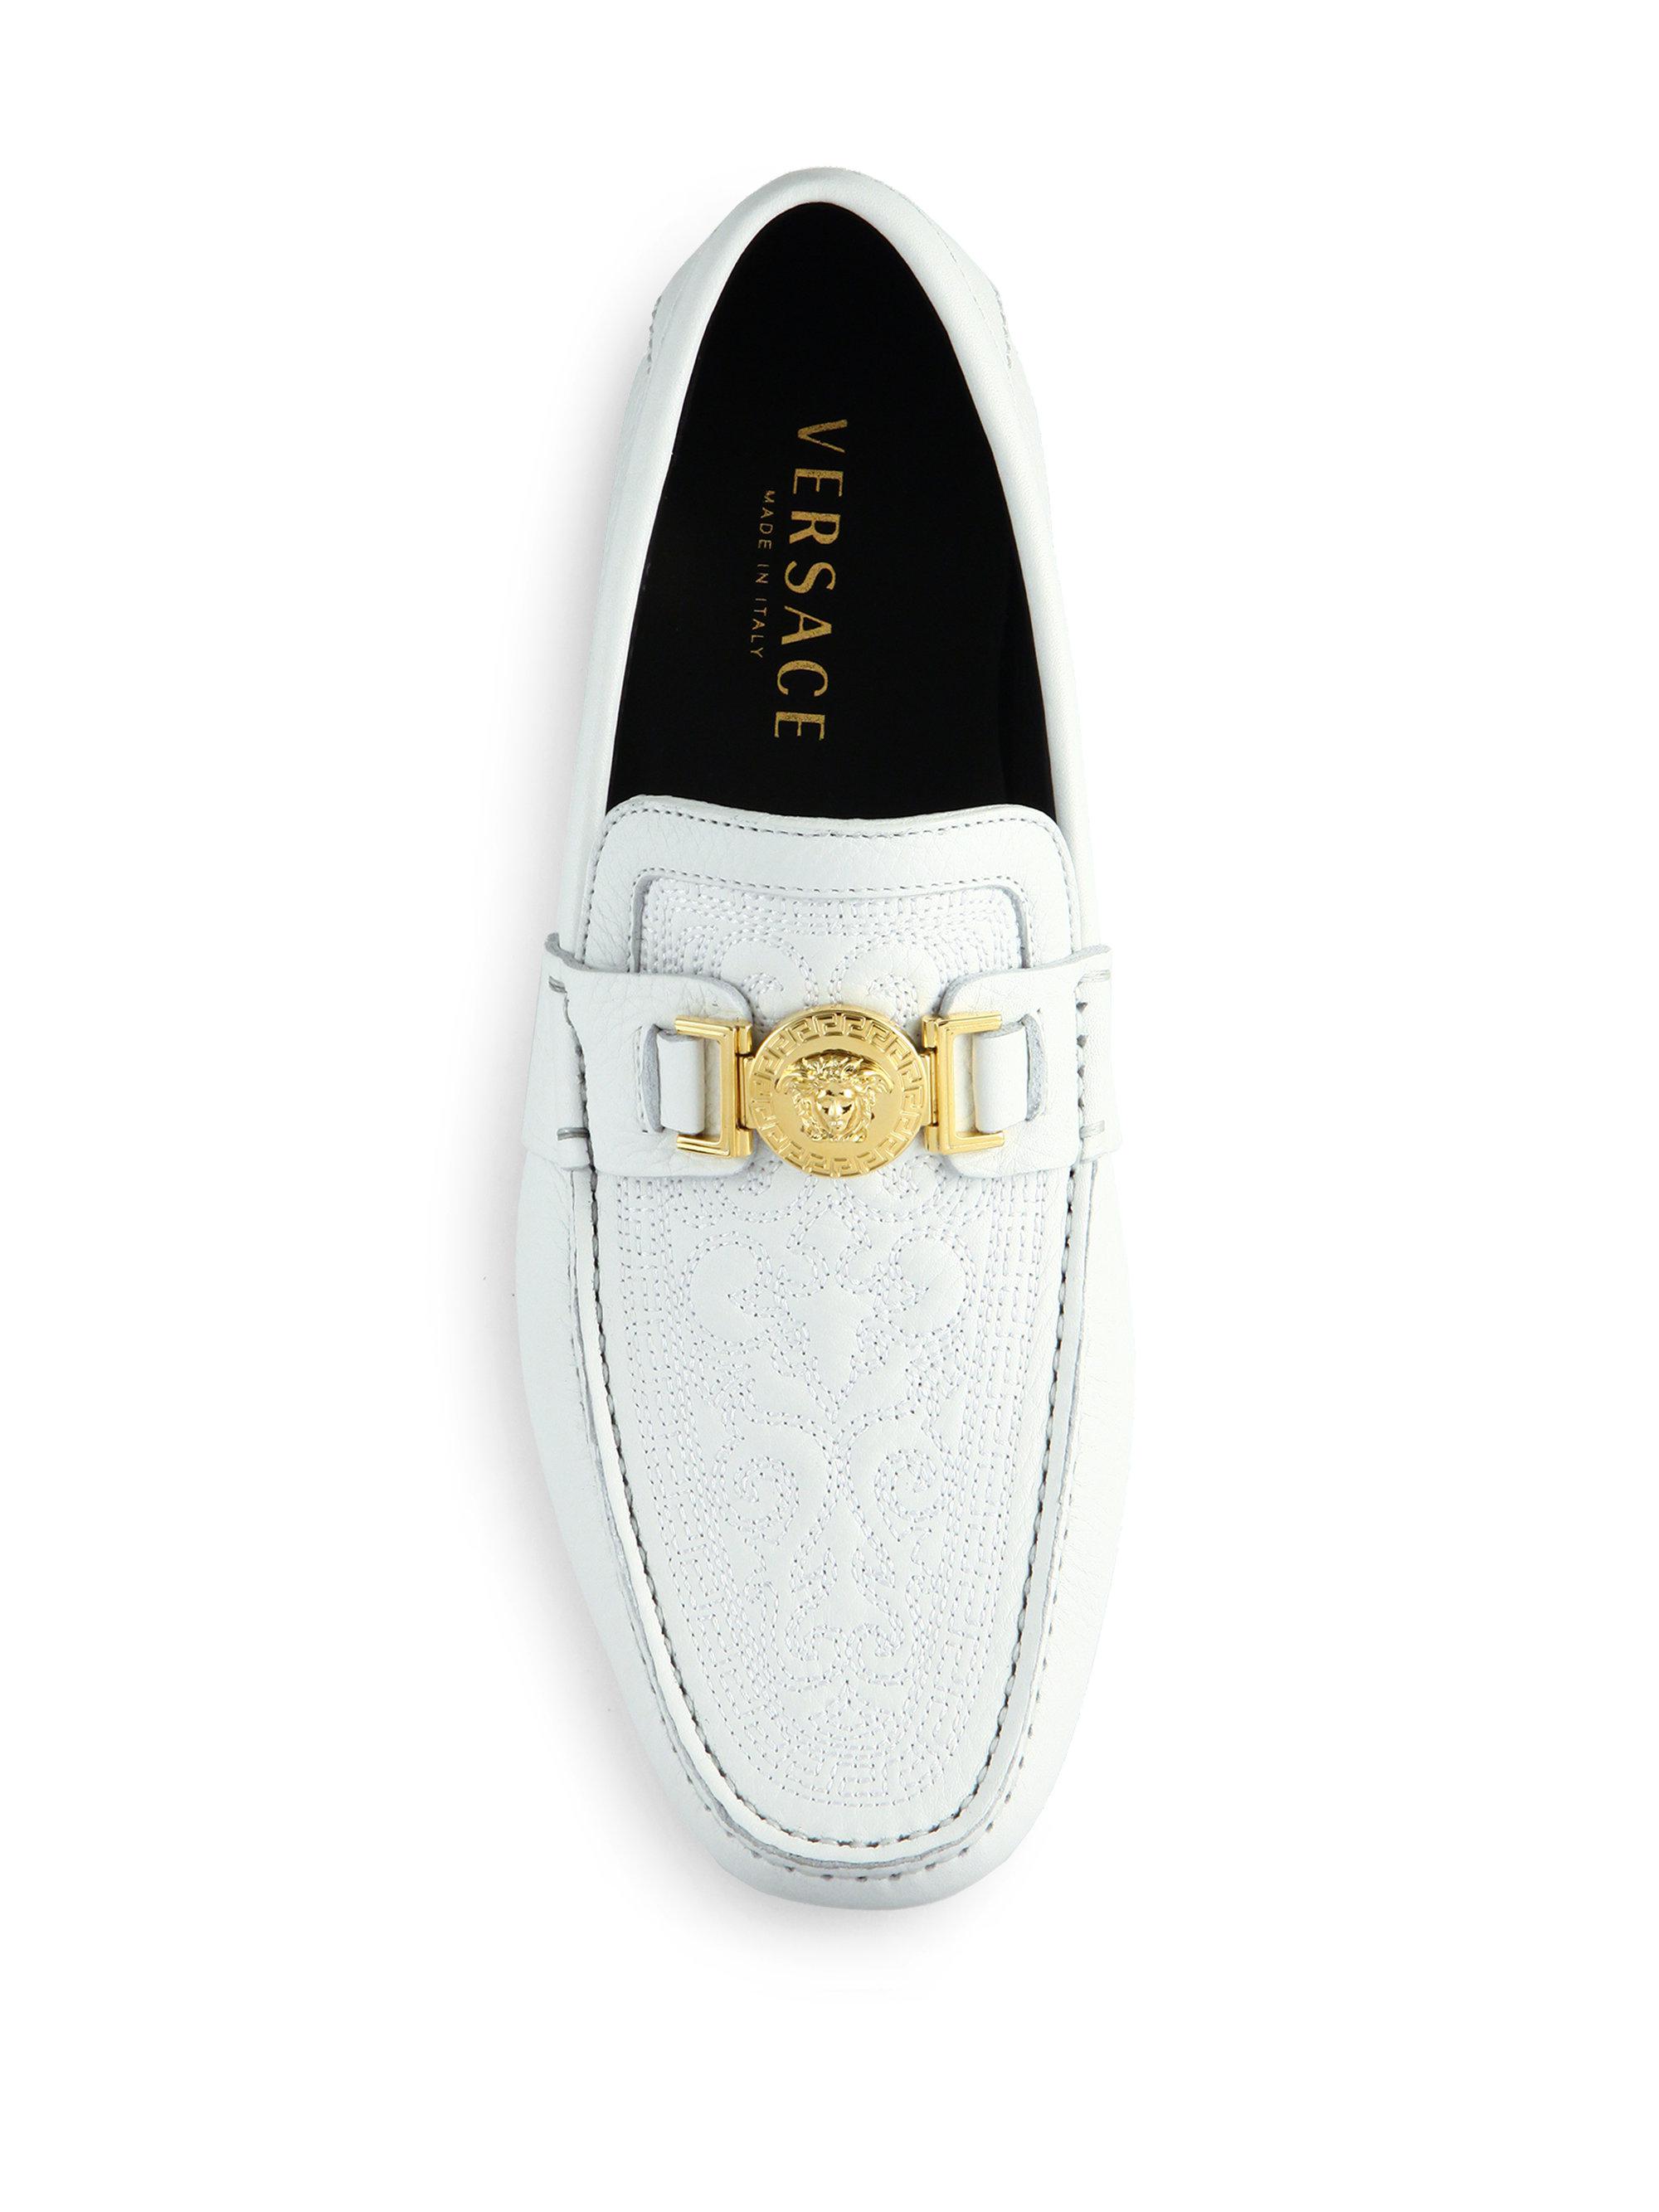 white versace loafers